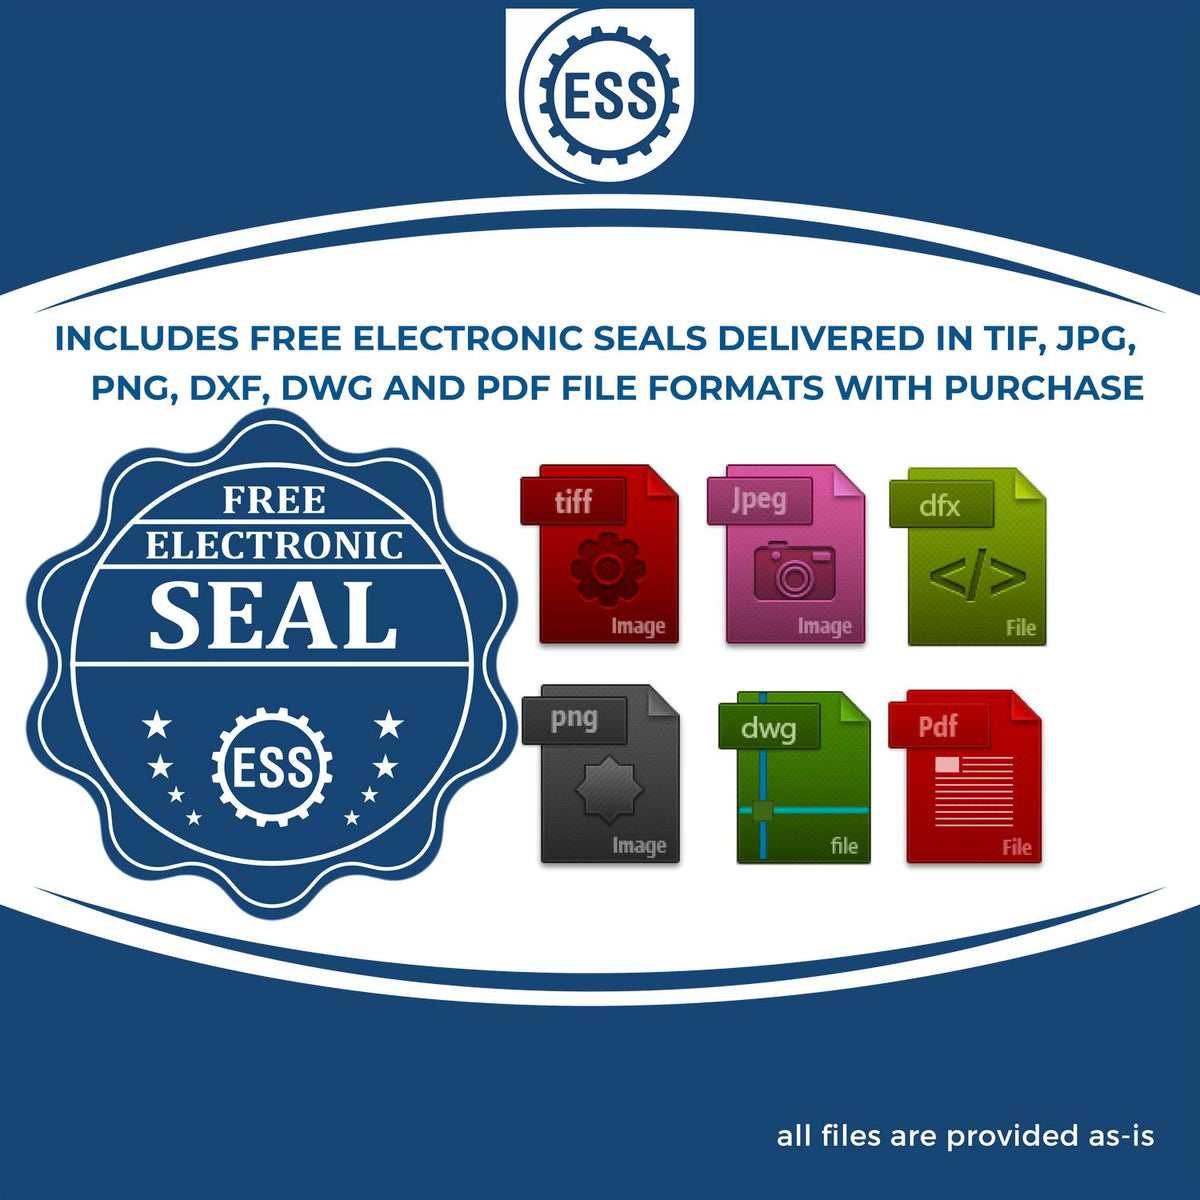 An infographic for the free electronic seal for the Handheld North Carolina Professional Geologist Embosser illustrating the different file type icons such as DXF, DWG, TIF, JPG and PNG.